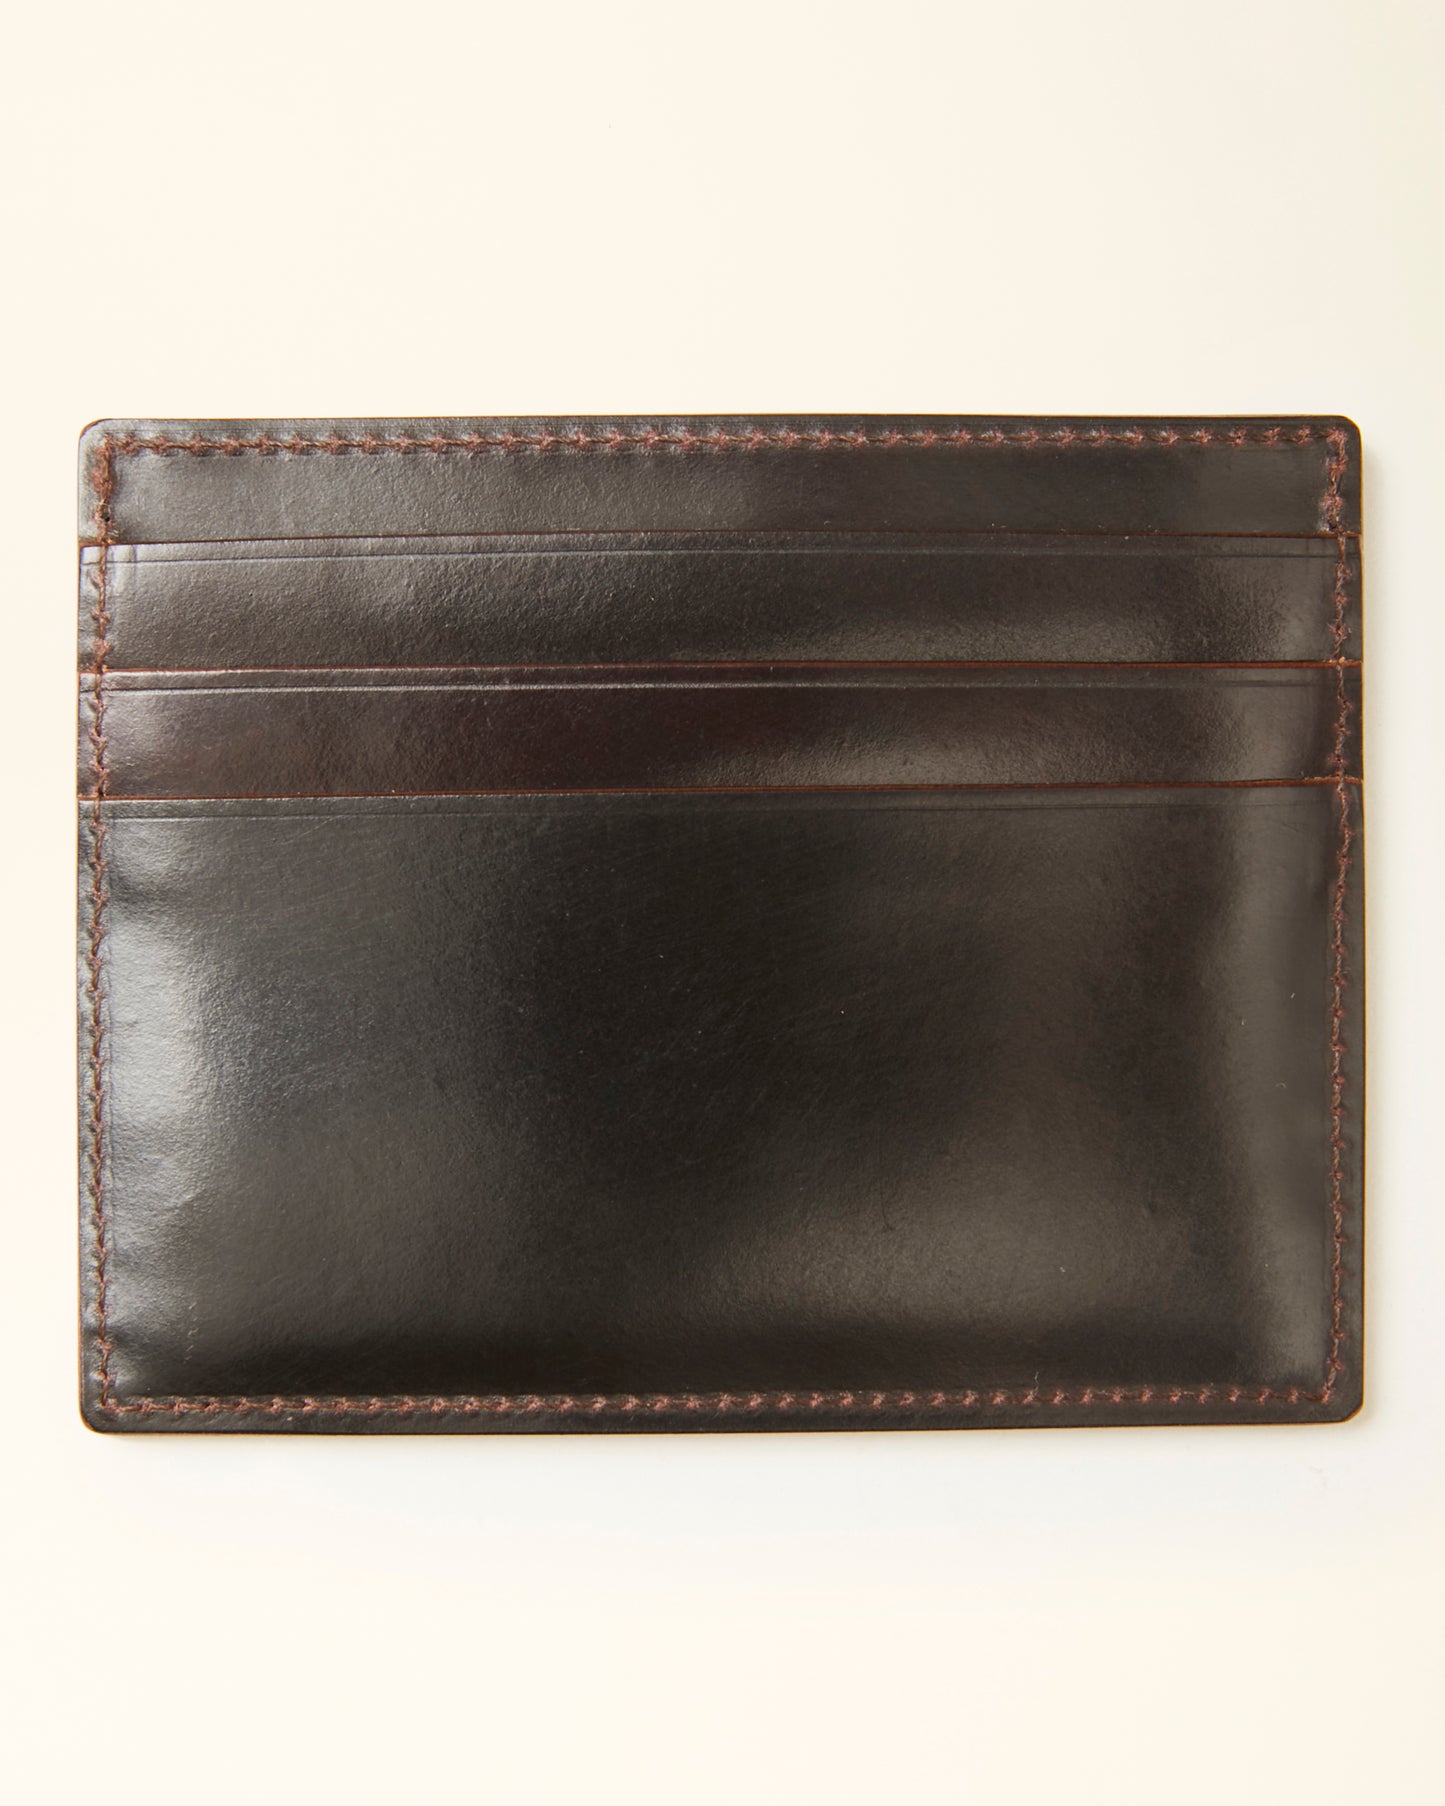 LG 6005 Color 8 Shell Cordovan Credit Card Case